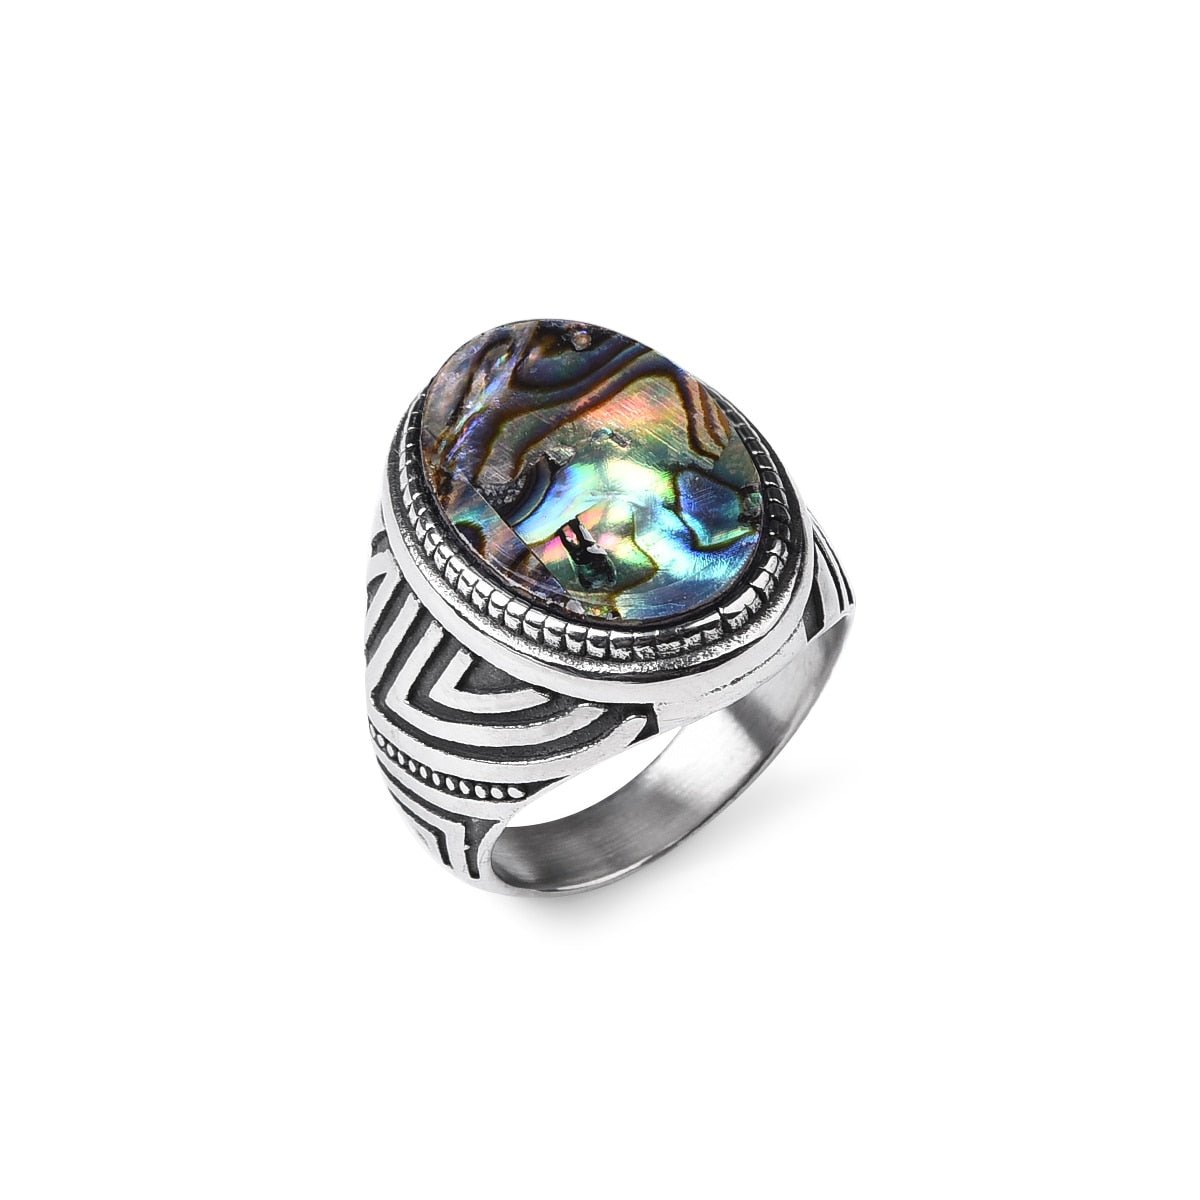 Bague Homme Abalone Impériale "Maxentius"